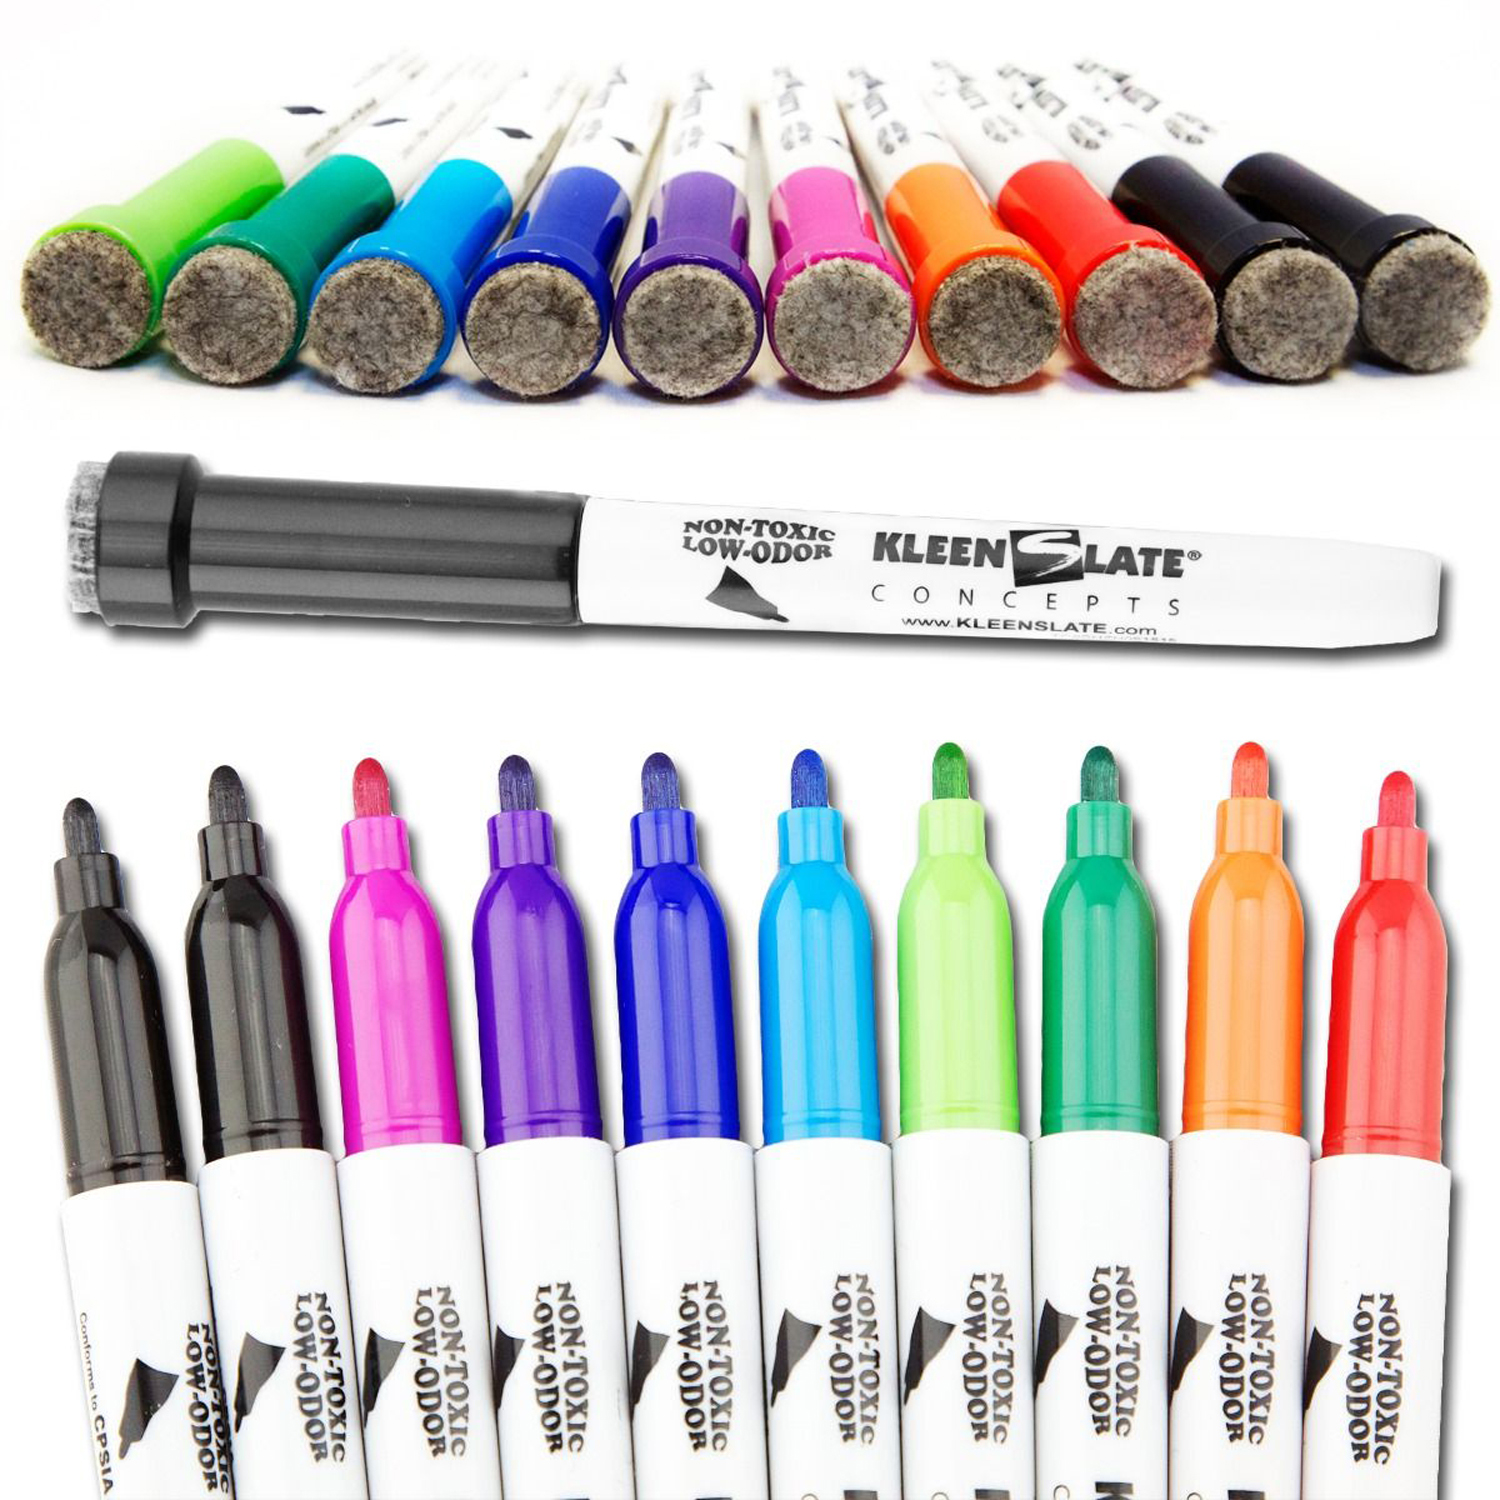 The Teachers' Lounge®  Colorful Dry-Erase Crayons, Pack of 9